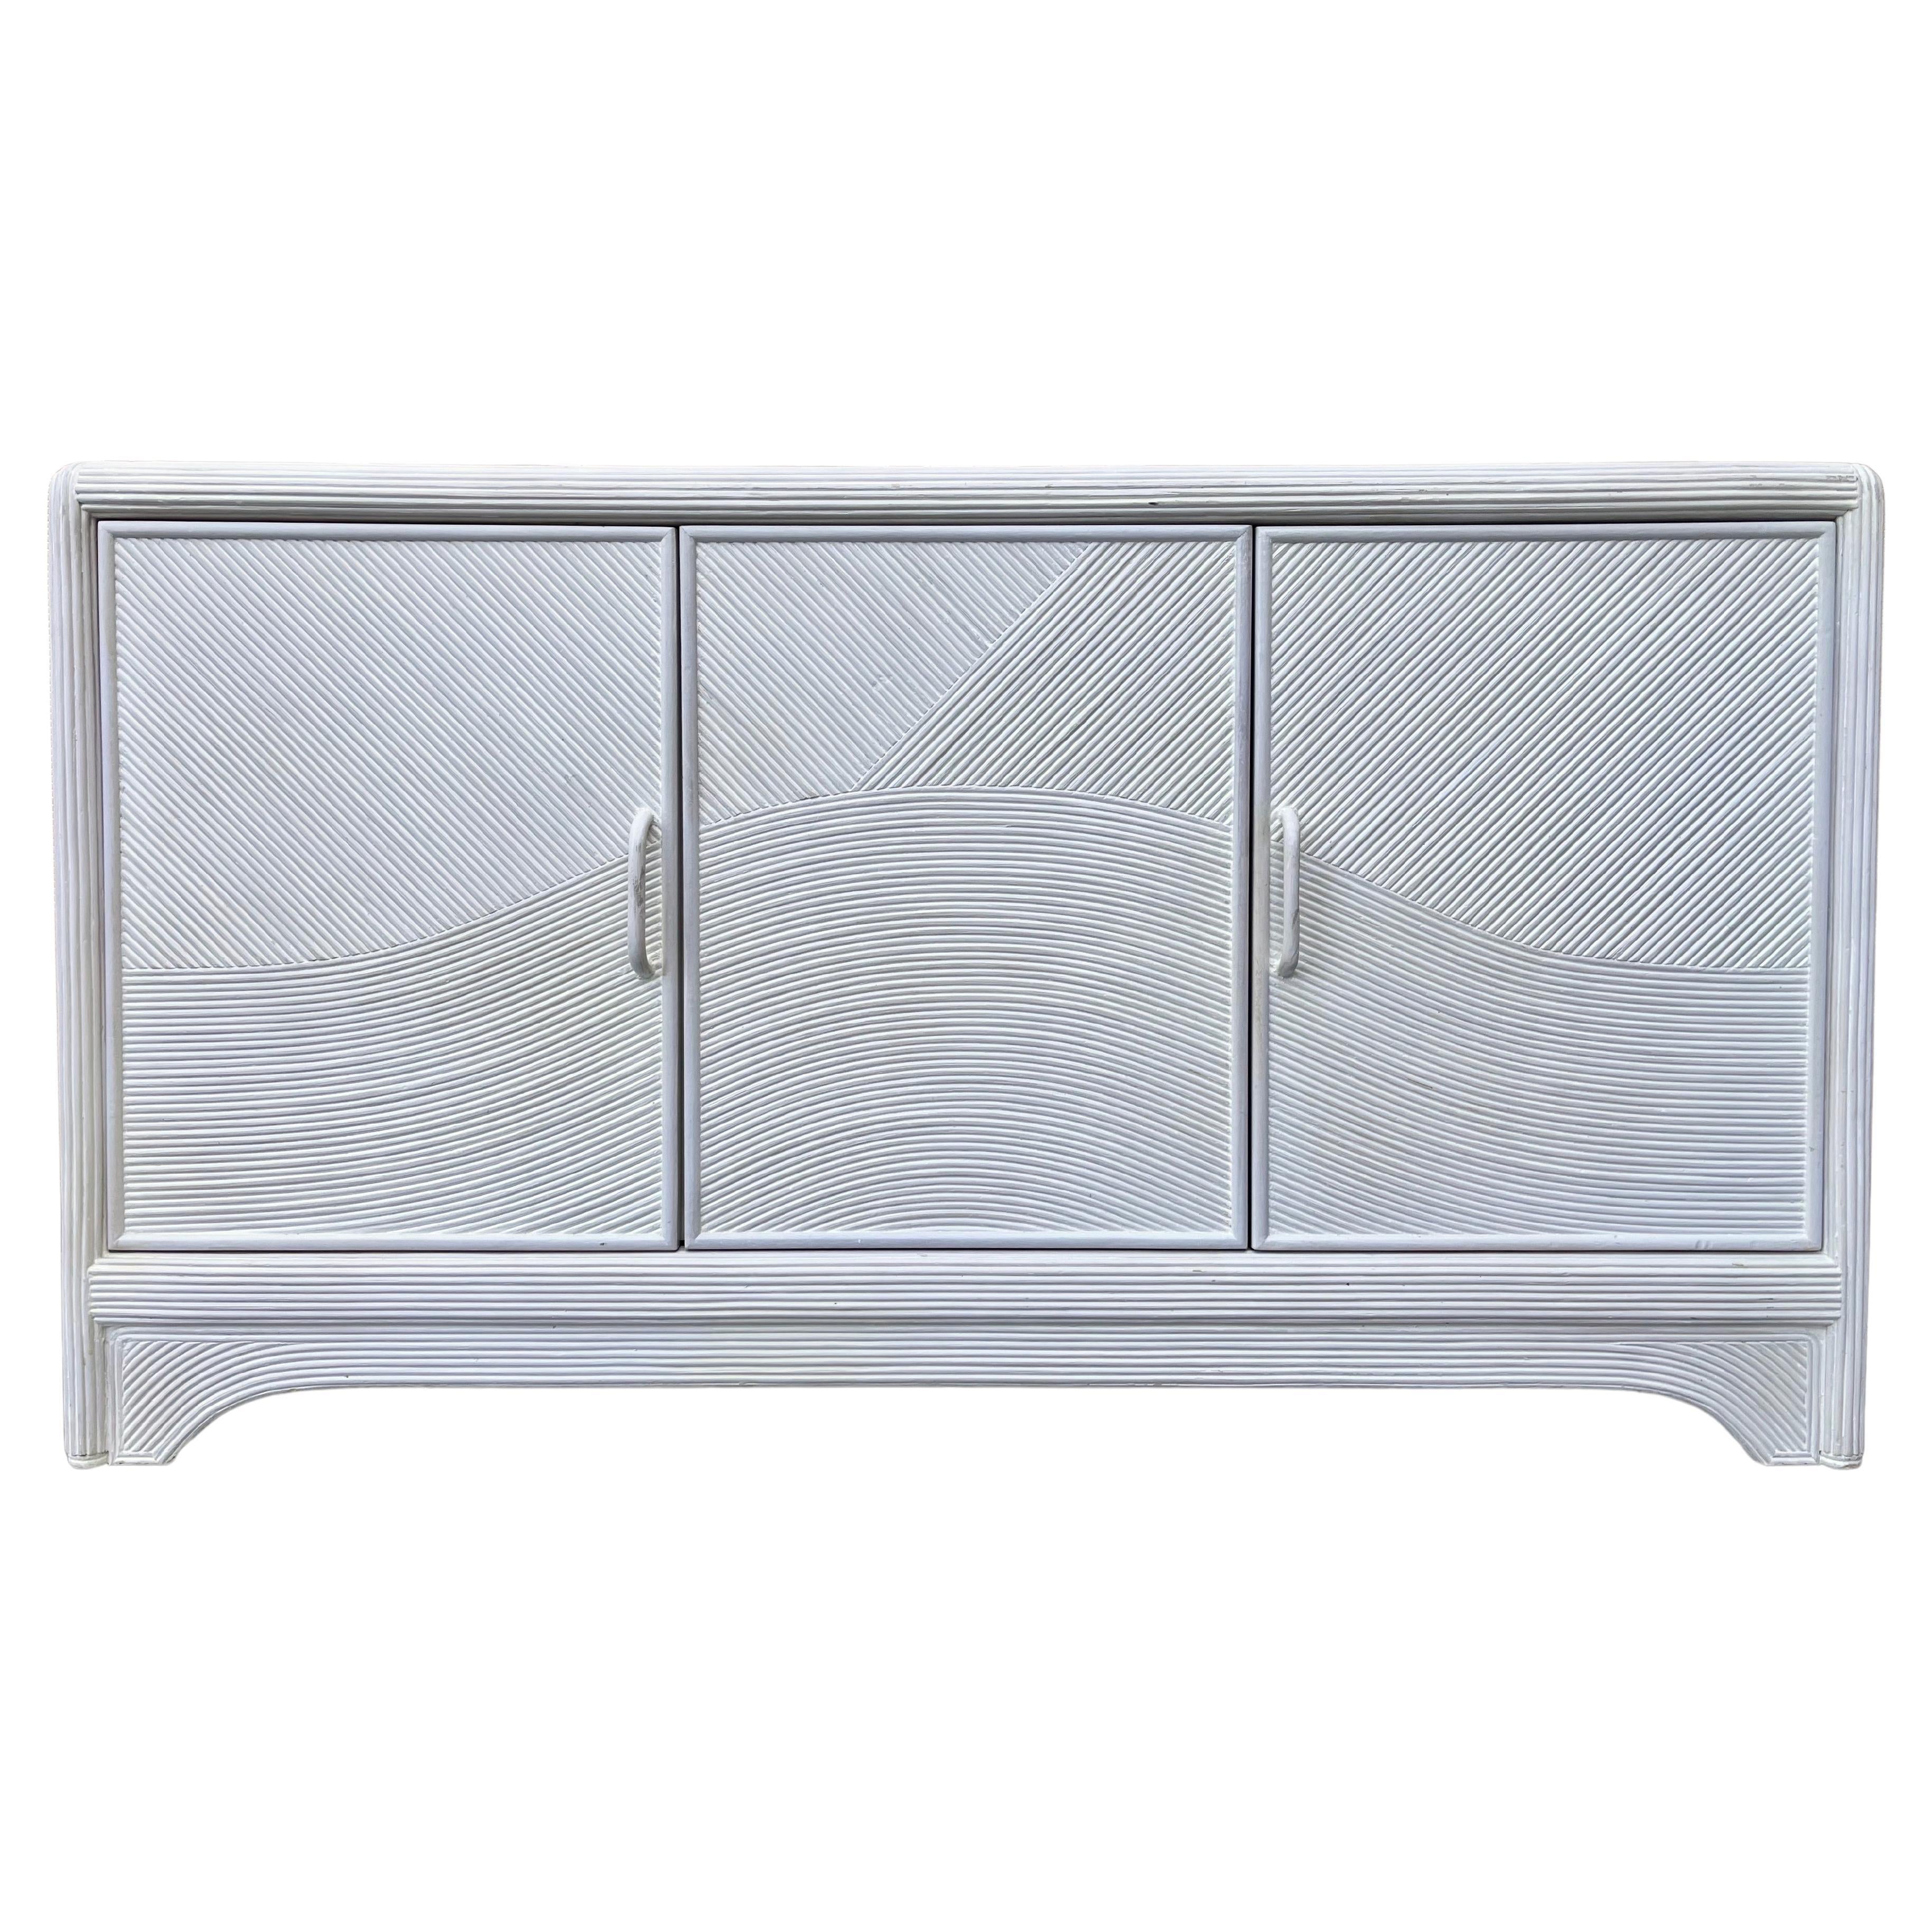 Coastal Style Pencil Reed Sideboard/ Credenza in the Gabriella Crespi Manner